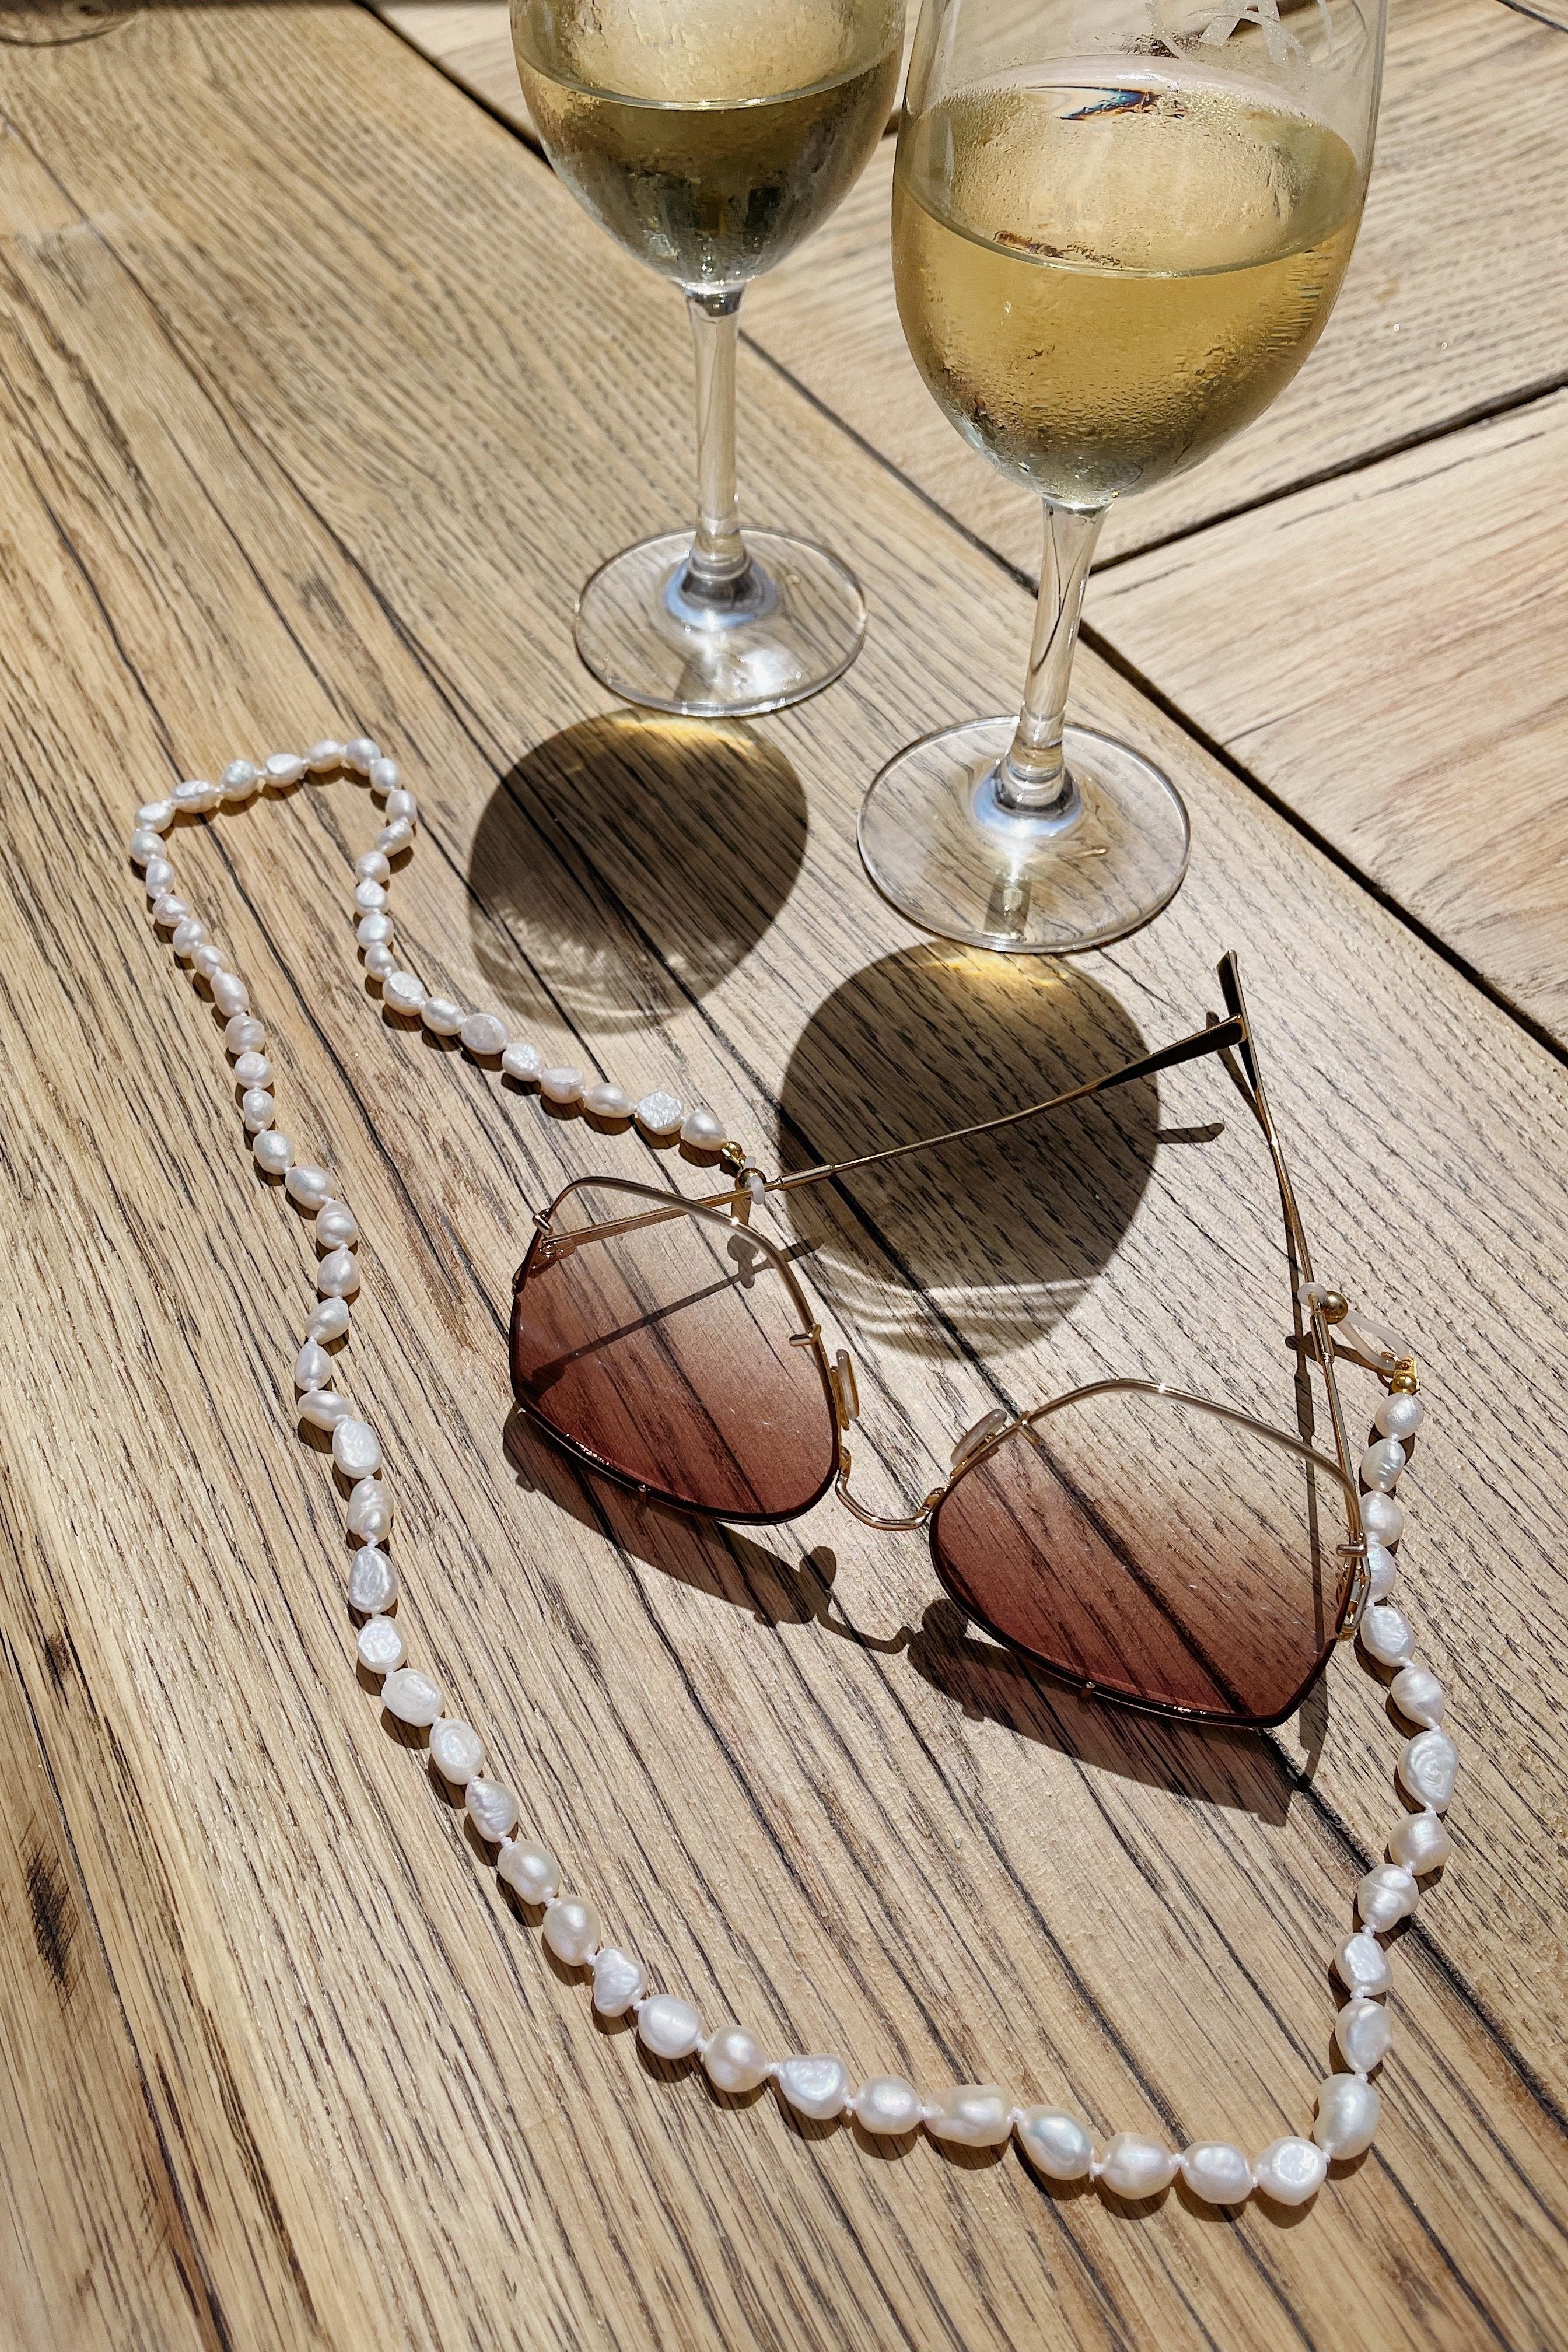 Fortuna Sunglasses Chain - Boutique Minimaliste has waterproof, durable, elegant and vintage inspired jewelry